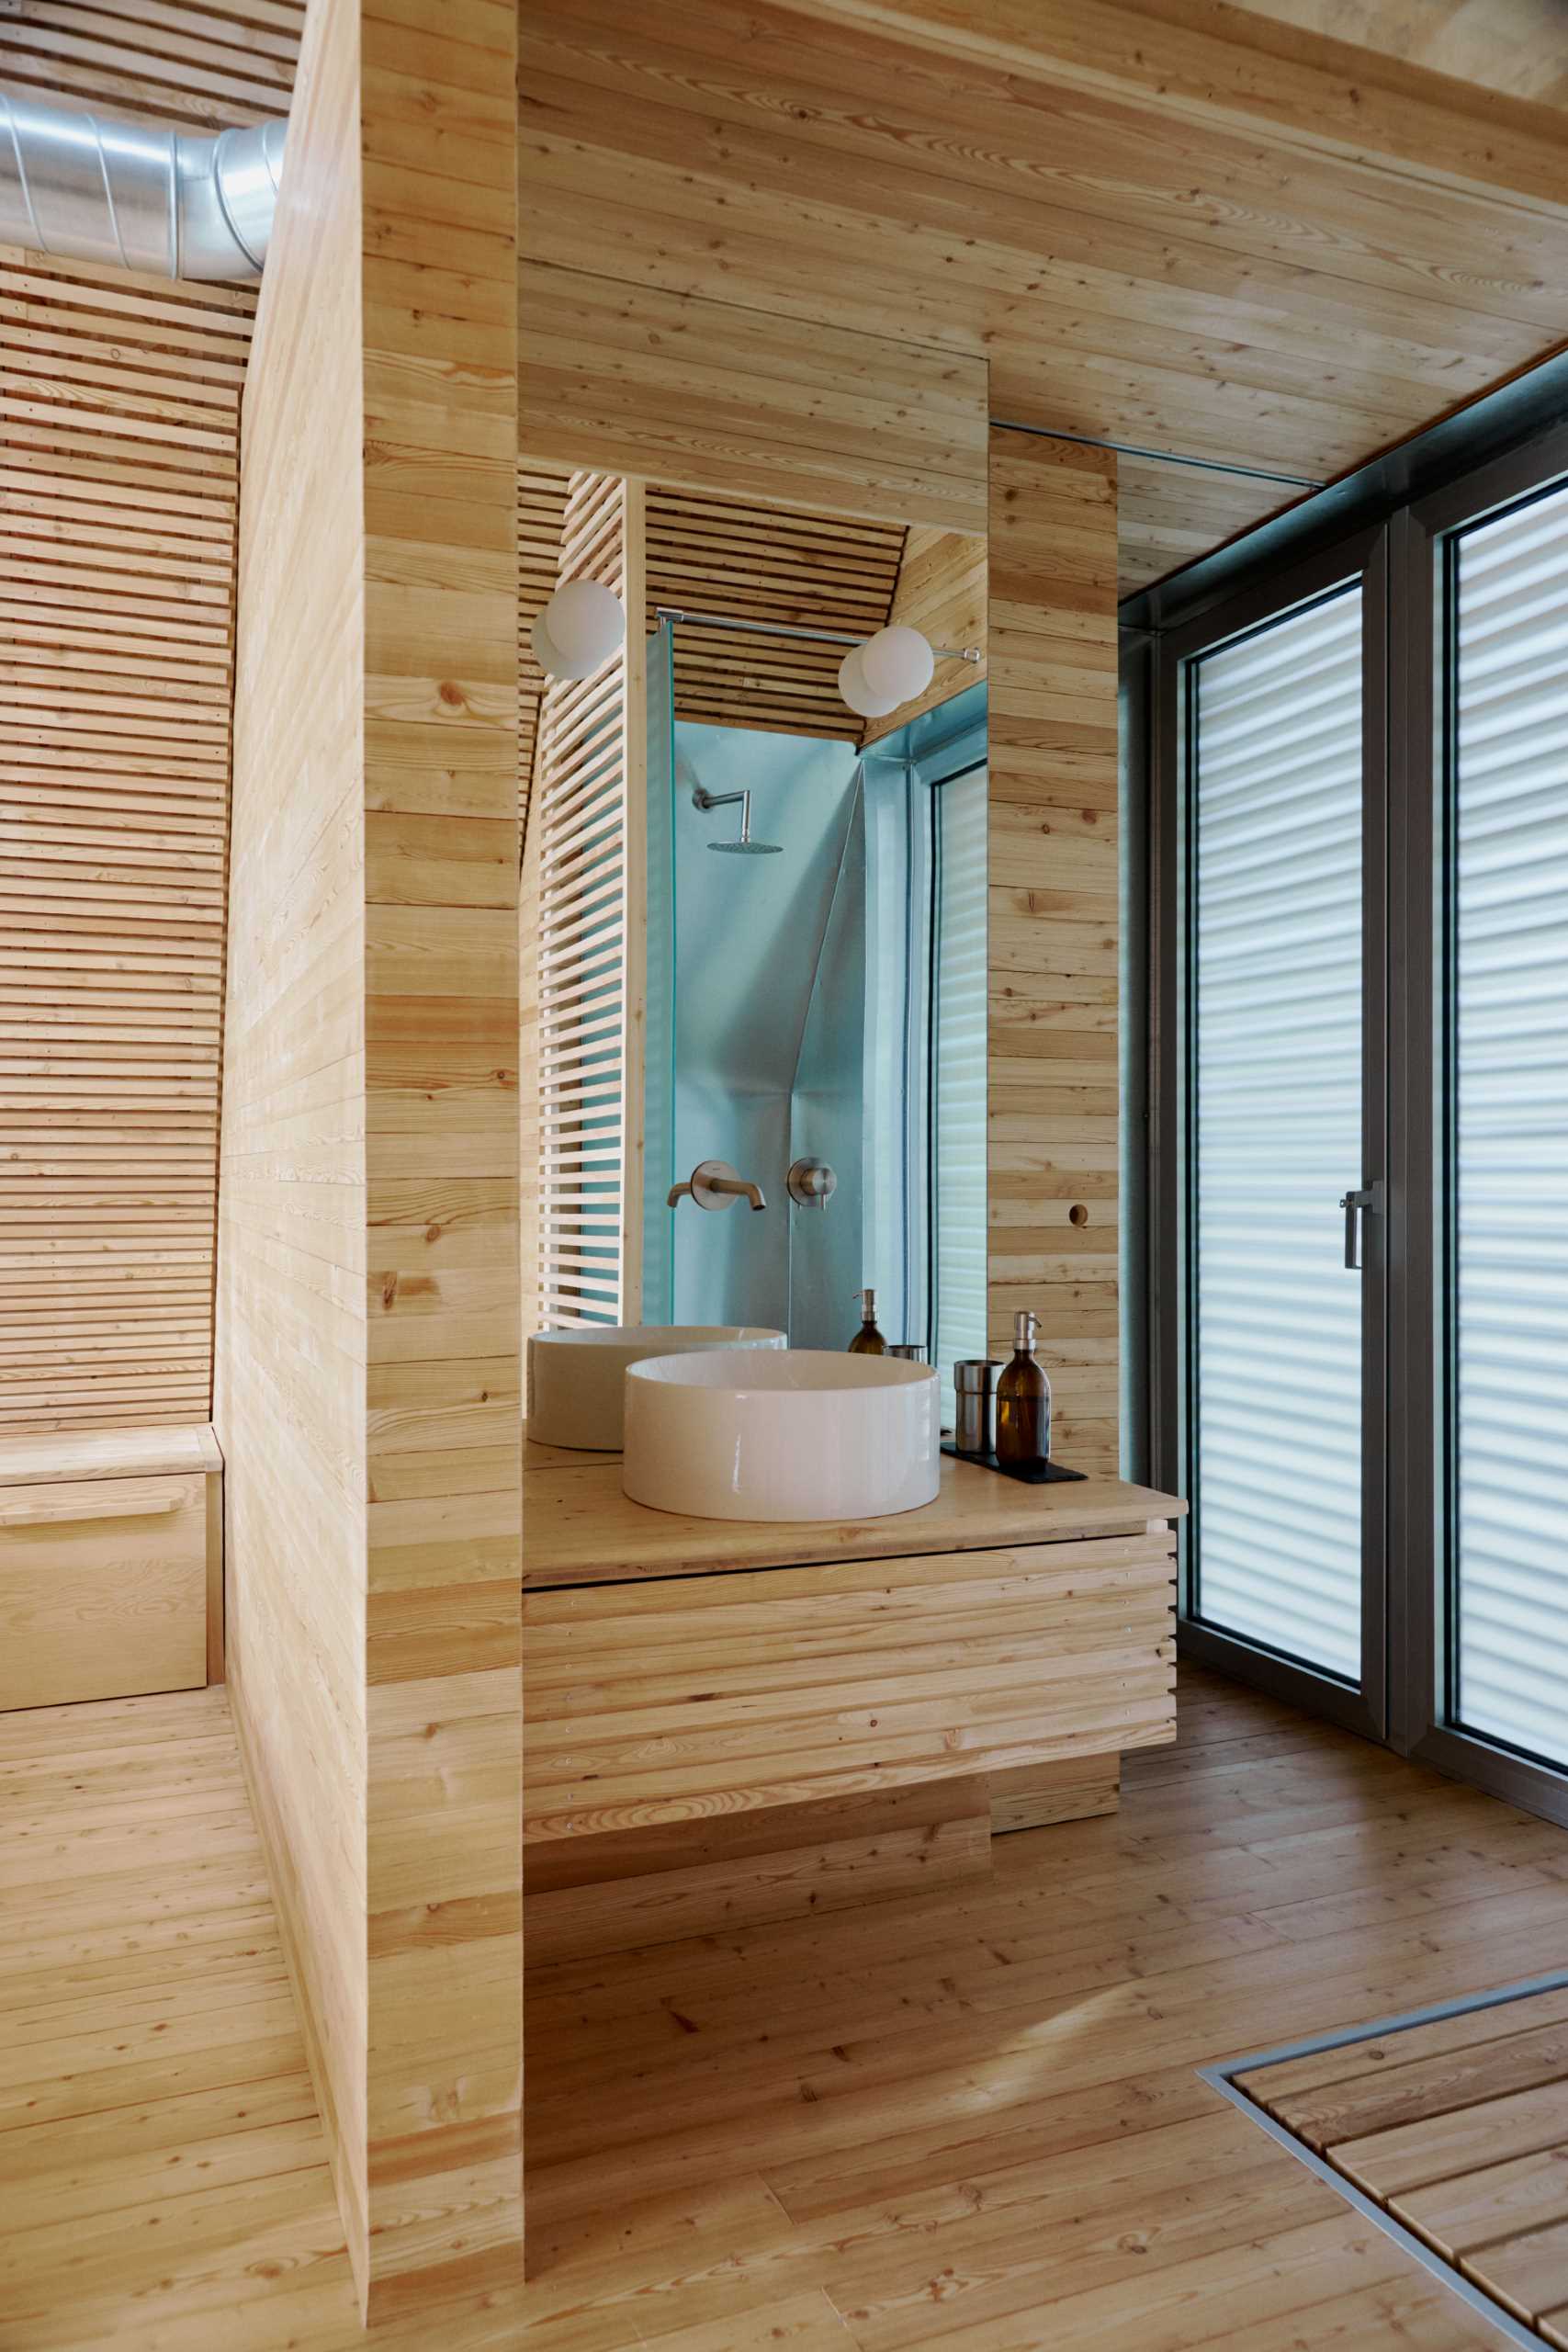 The minimal bathrooms include a simple wood vanity with a tall mirror and a walk-in shower.